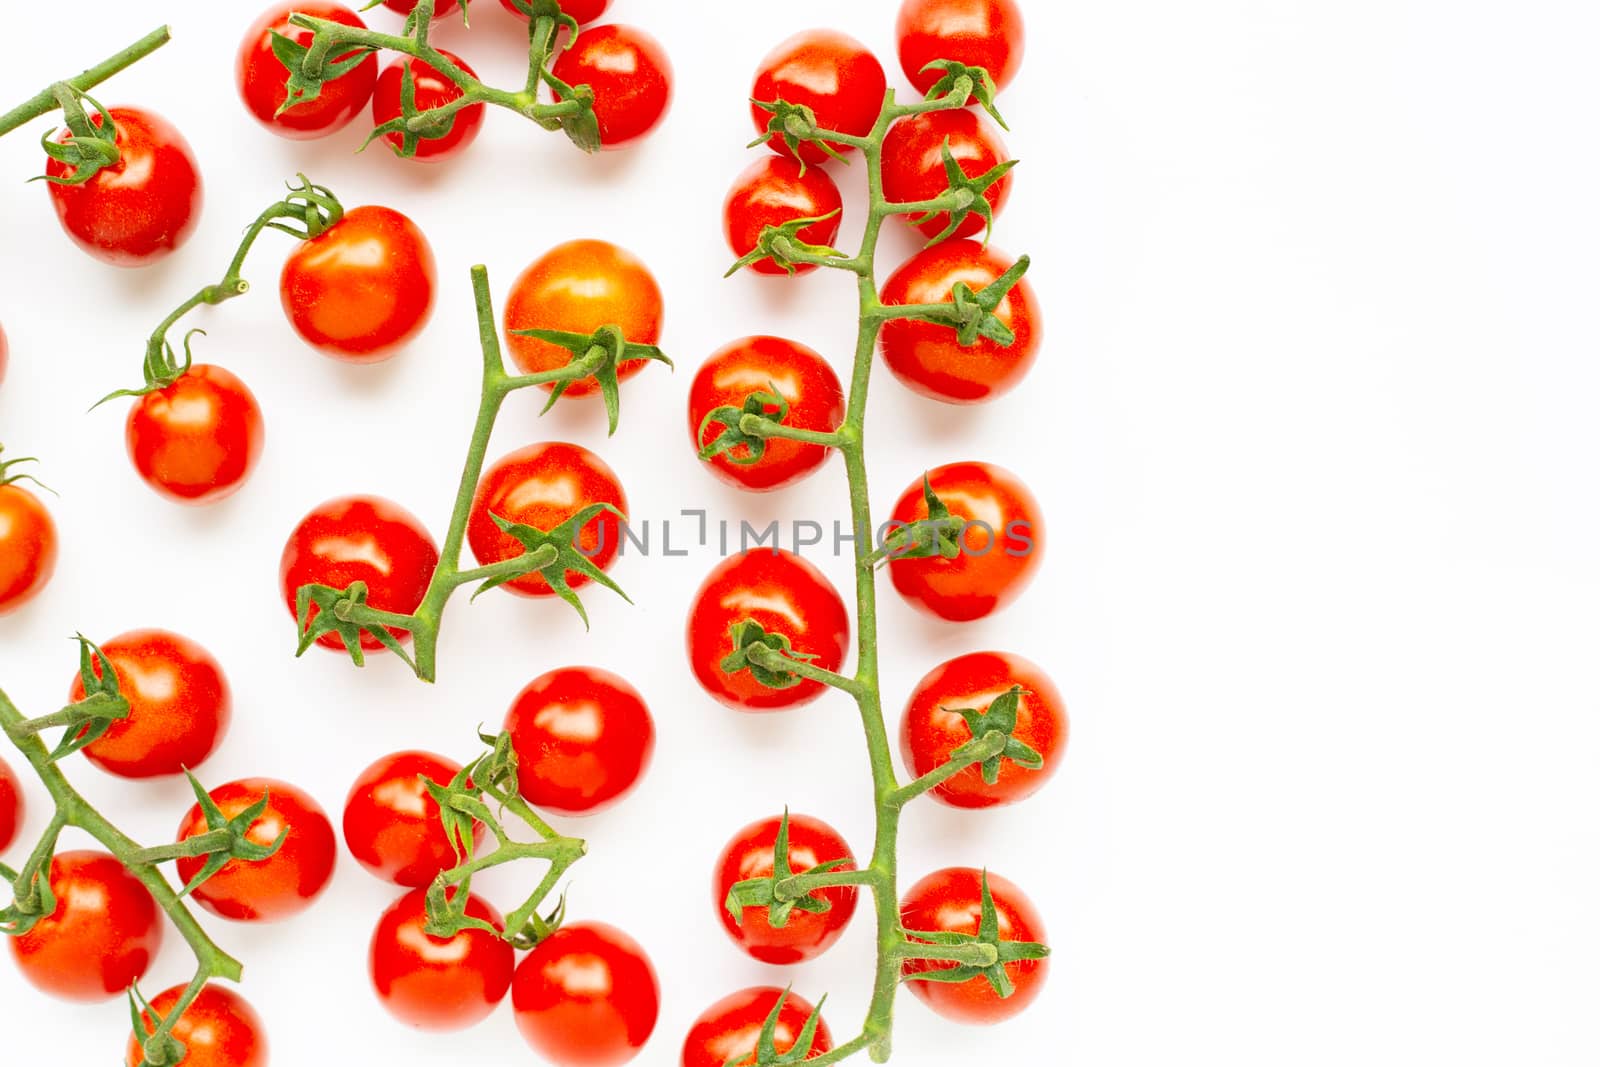 Fresh cherry tomatoes isolated on white background. Copy space